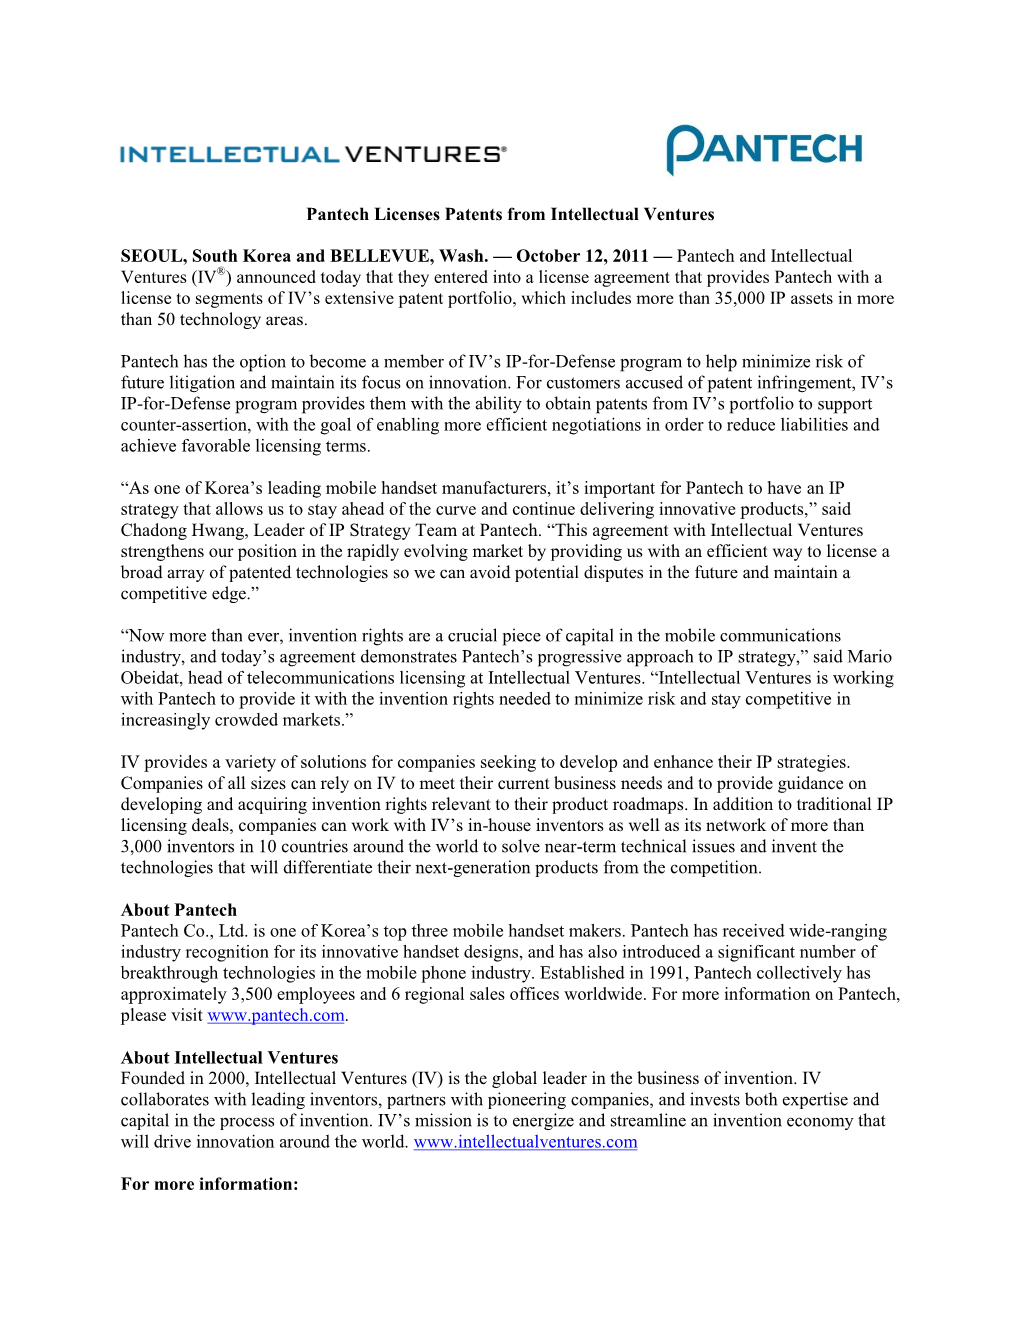 Pantech Licenses Patents from Intellectual Ventures